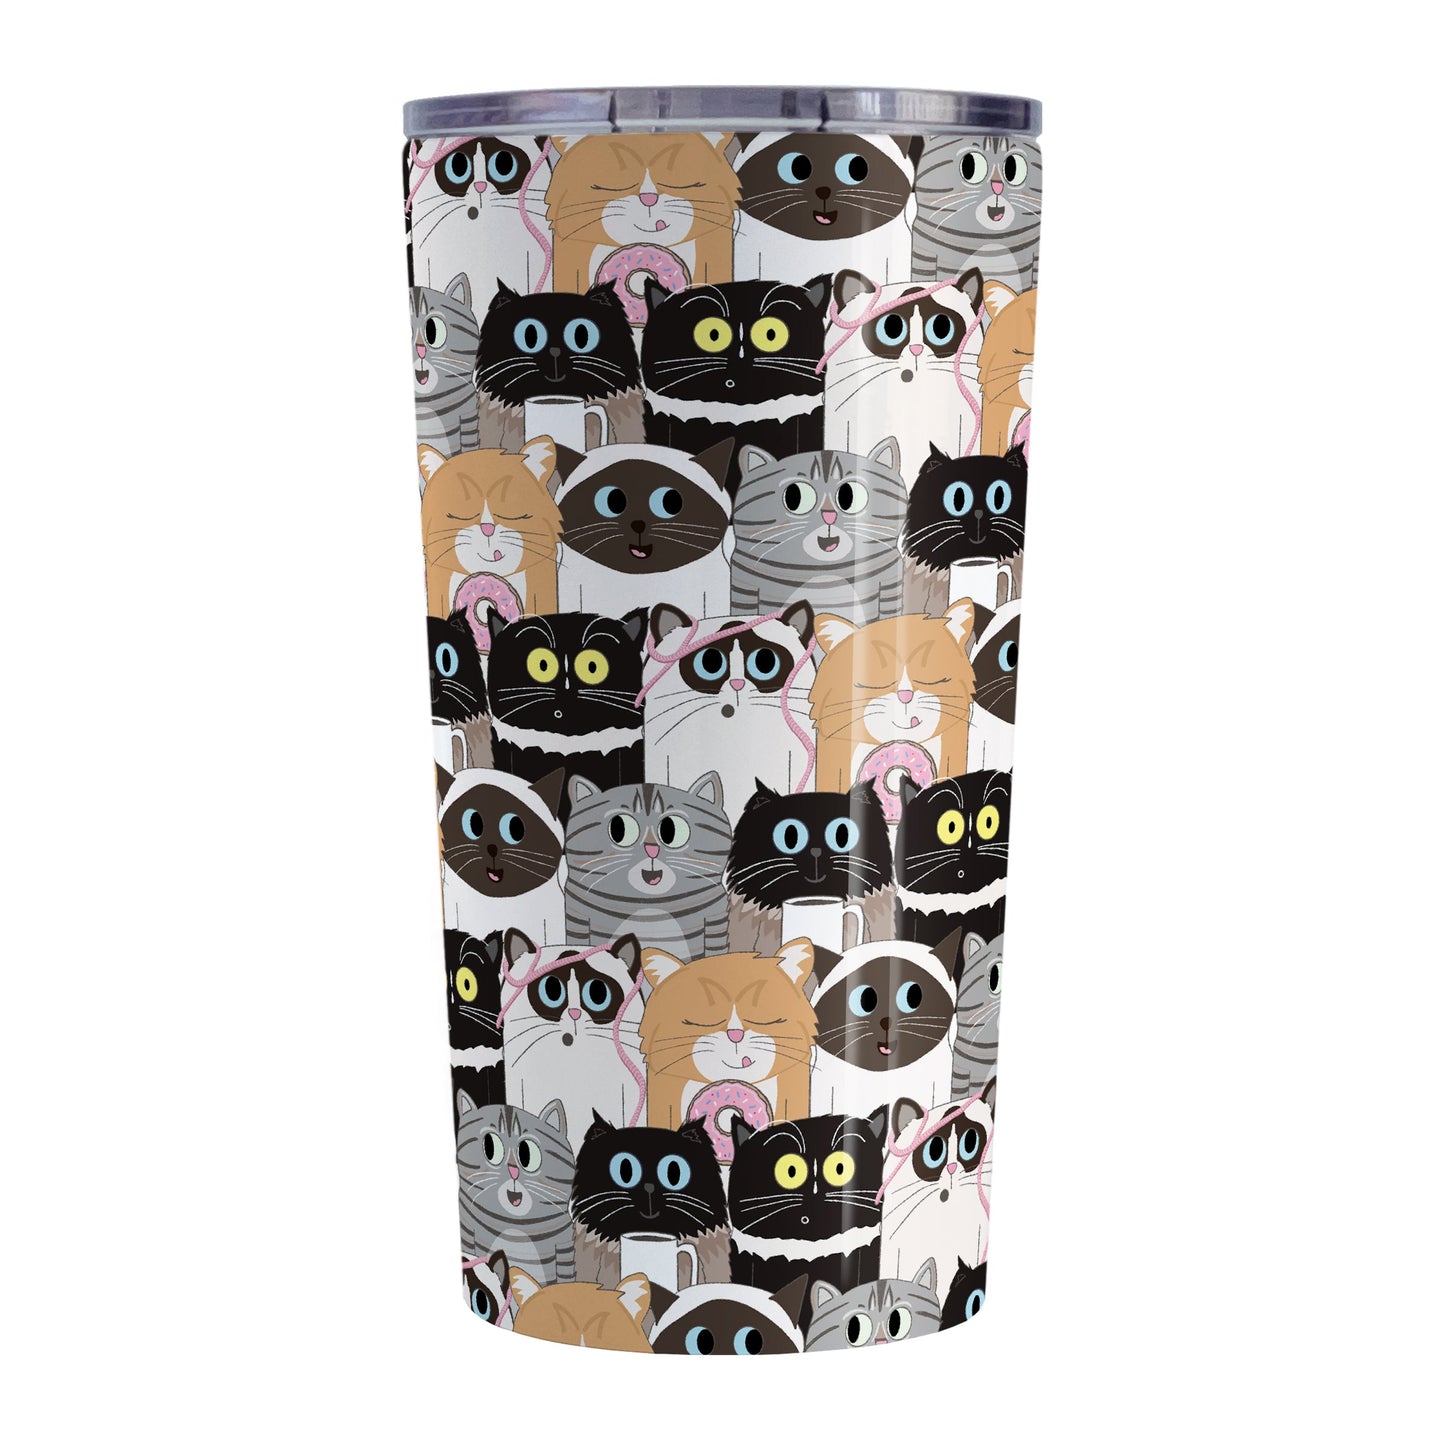 Cute Cat Stack Pattern Tumbler Cup (20oz, stainless steel insulated) at Amy's Coffee Mugs. Cute cats tumbler cup with an illustrated pattern of different breeds of cats with different fun expressions, with yarn, coffee, and donuts. This stacked pattern of cats wraps around the cup.